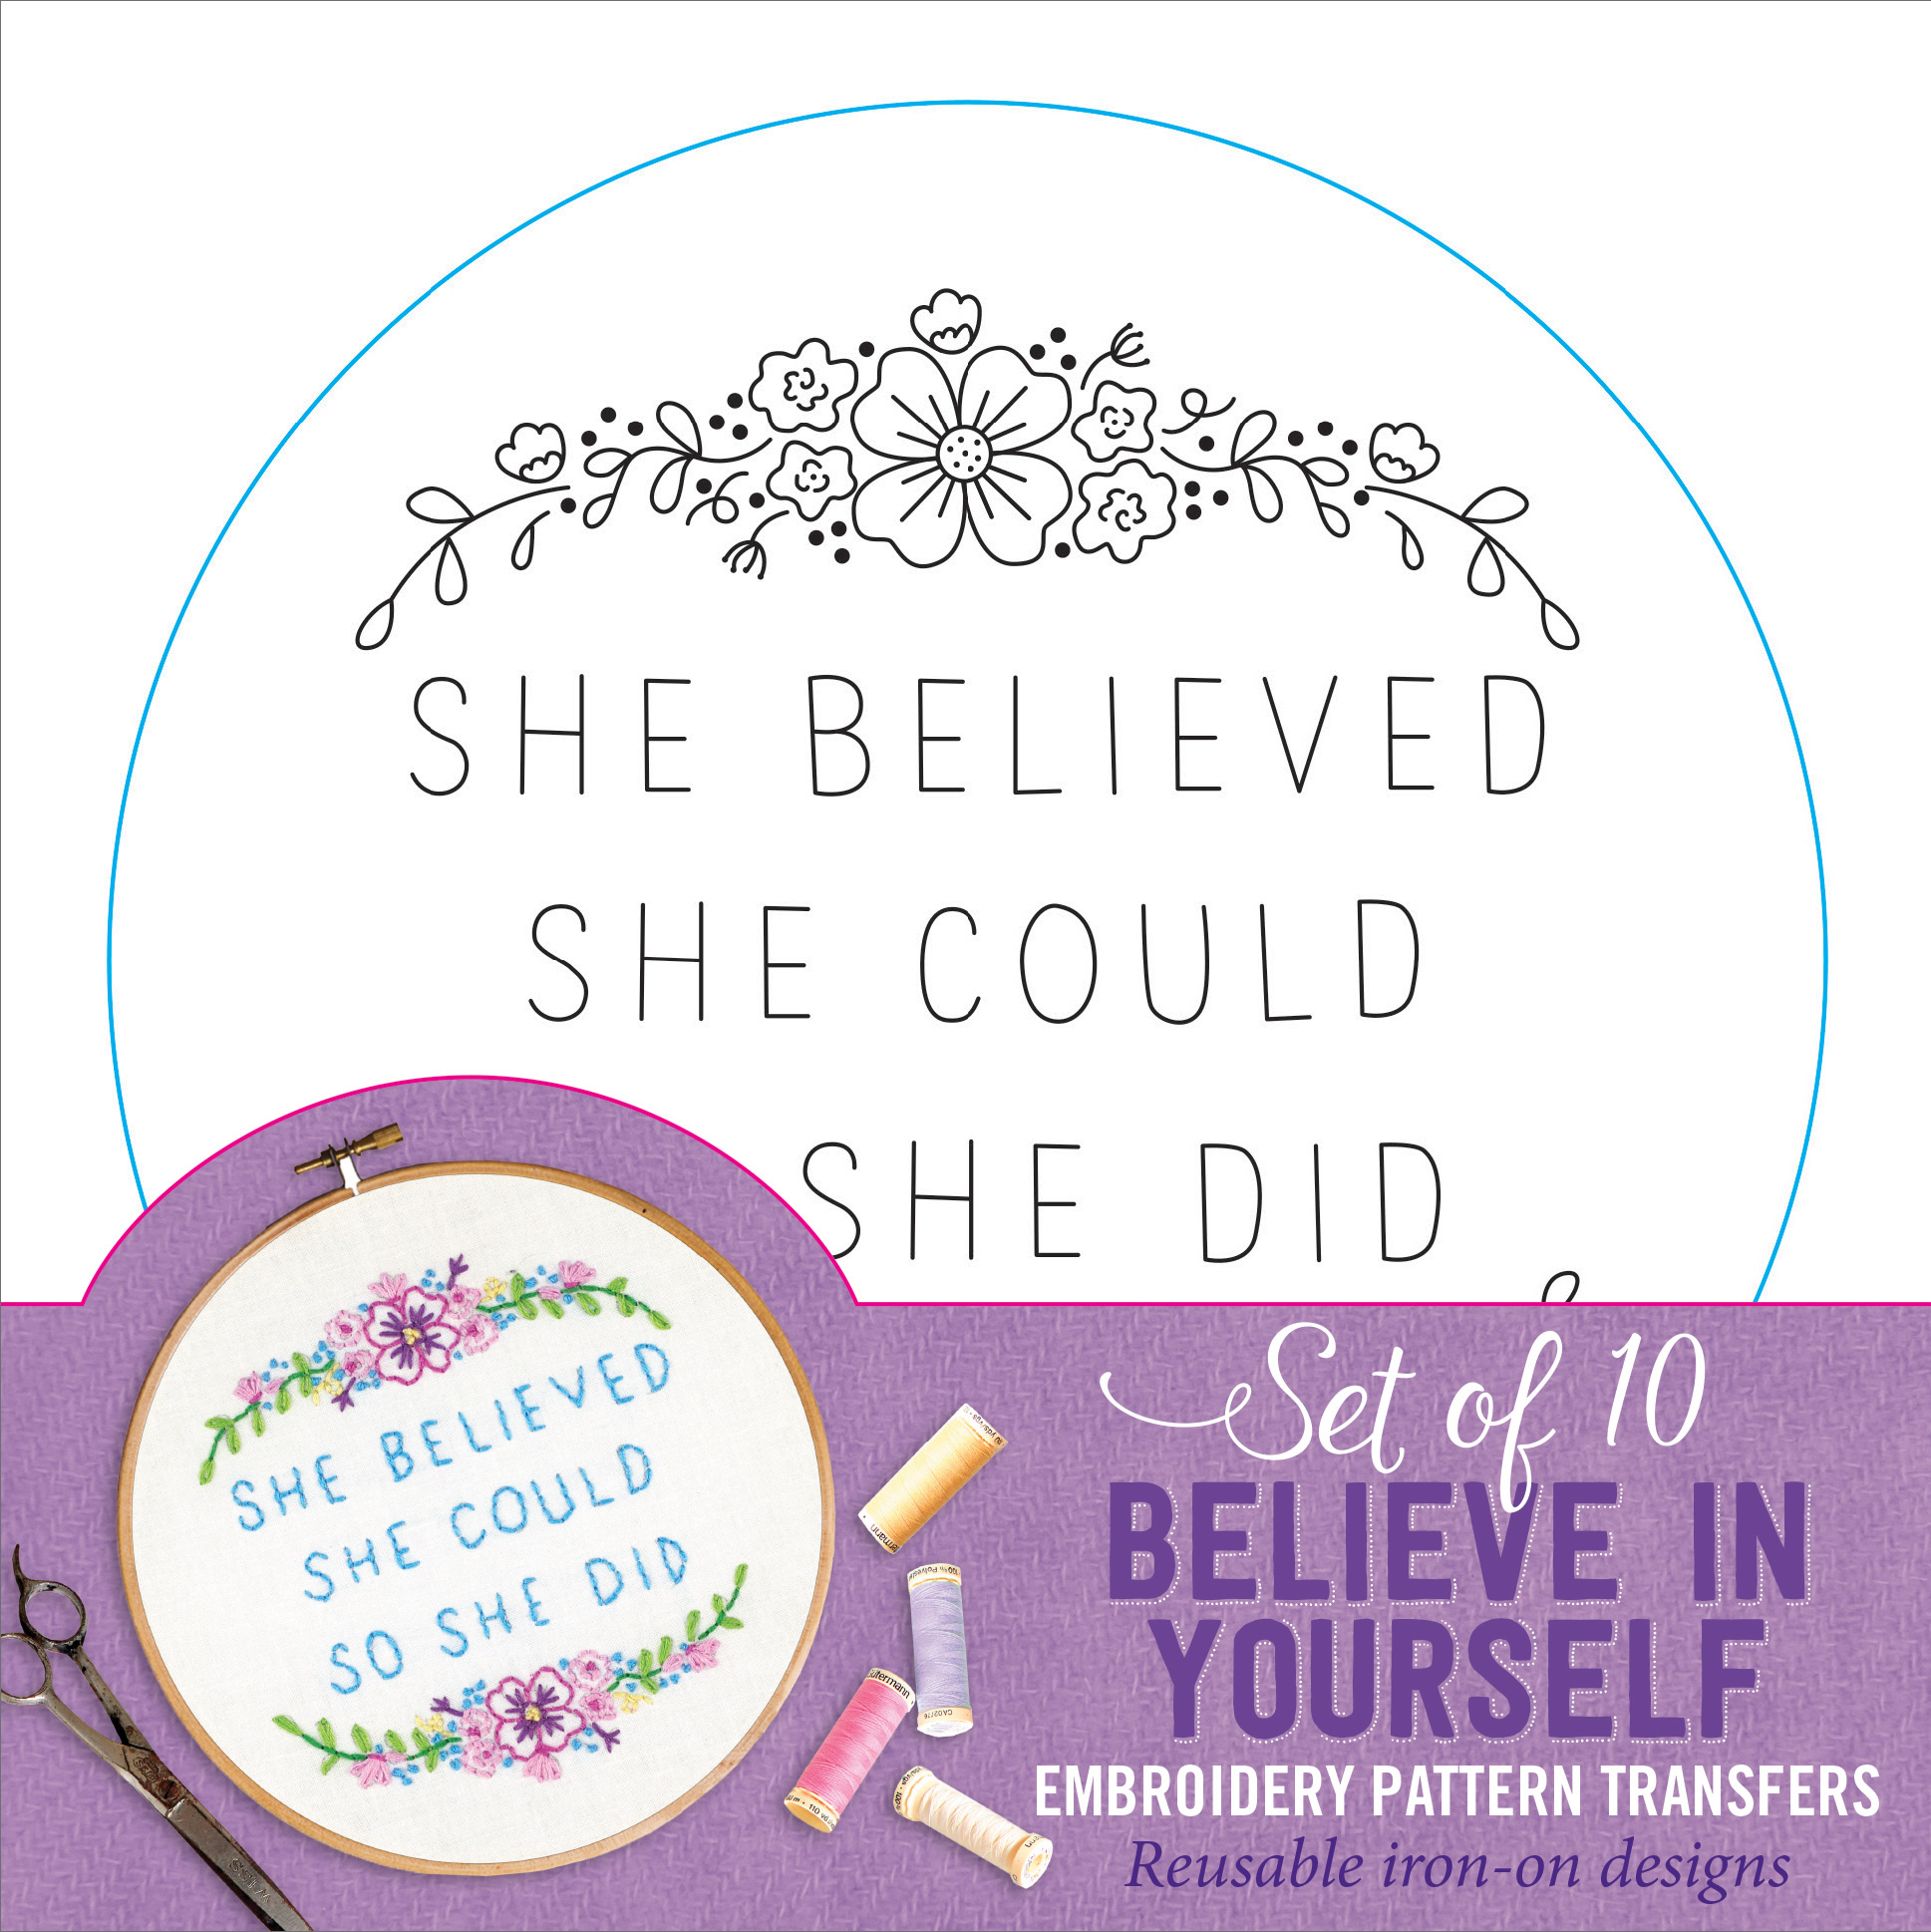 Believe in Yourself Embroidery Pattern Transfers [Book]